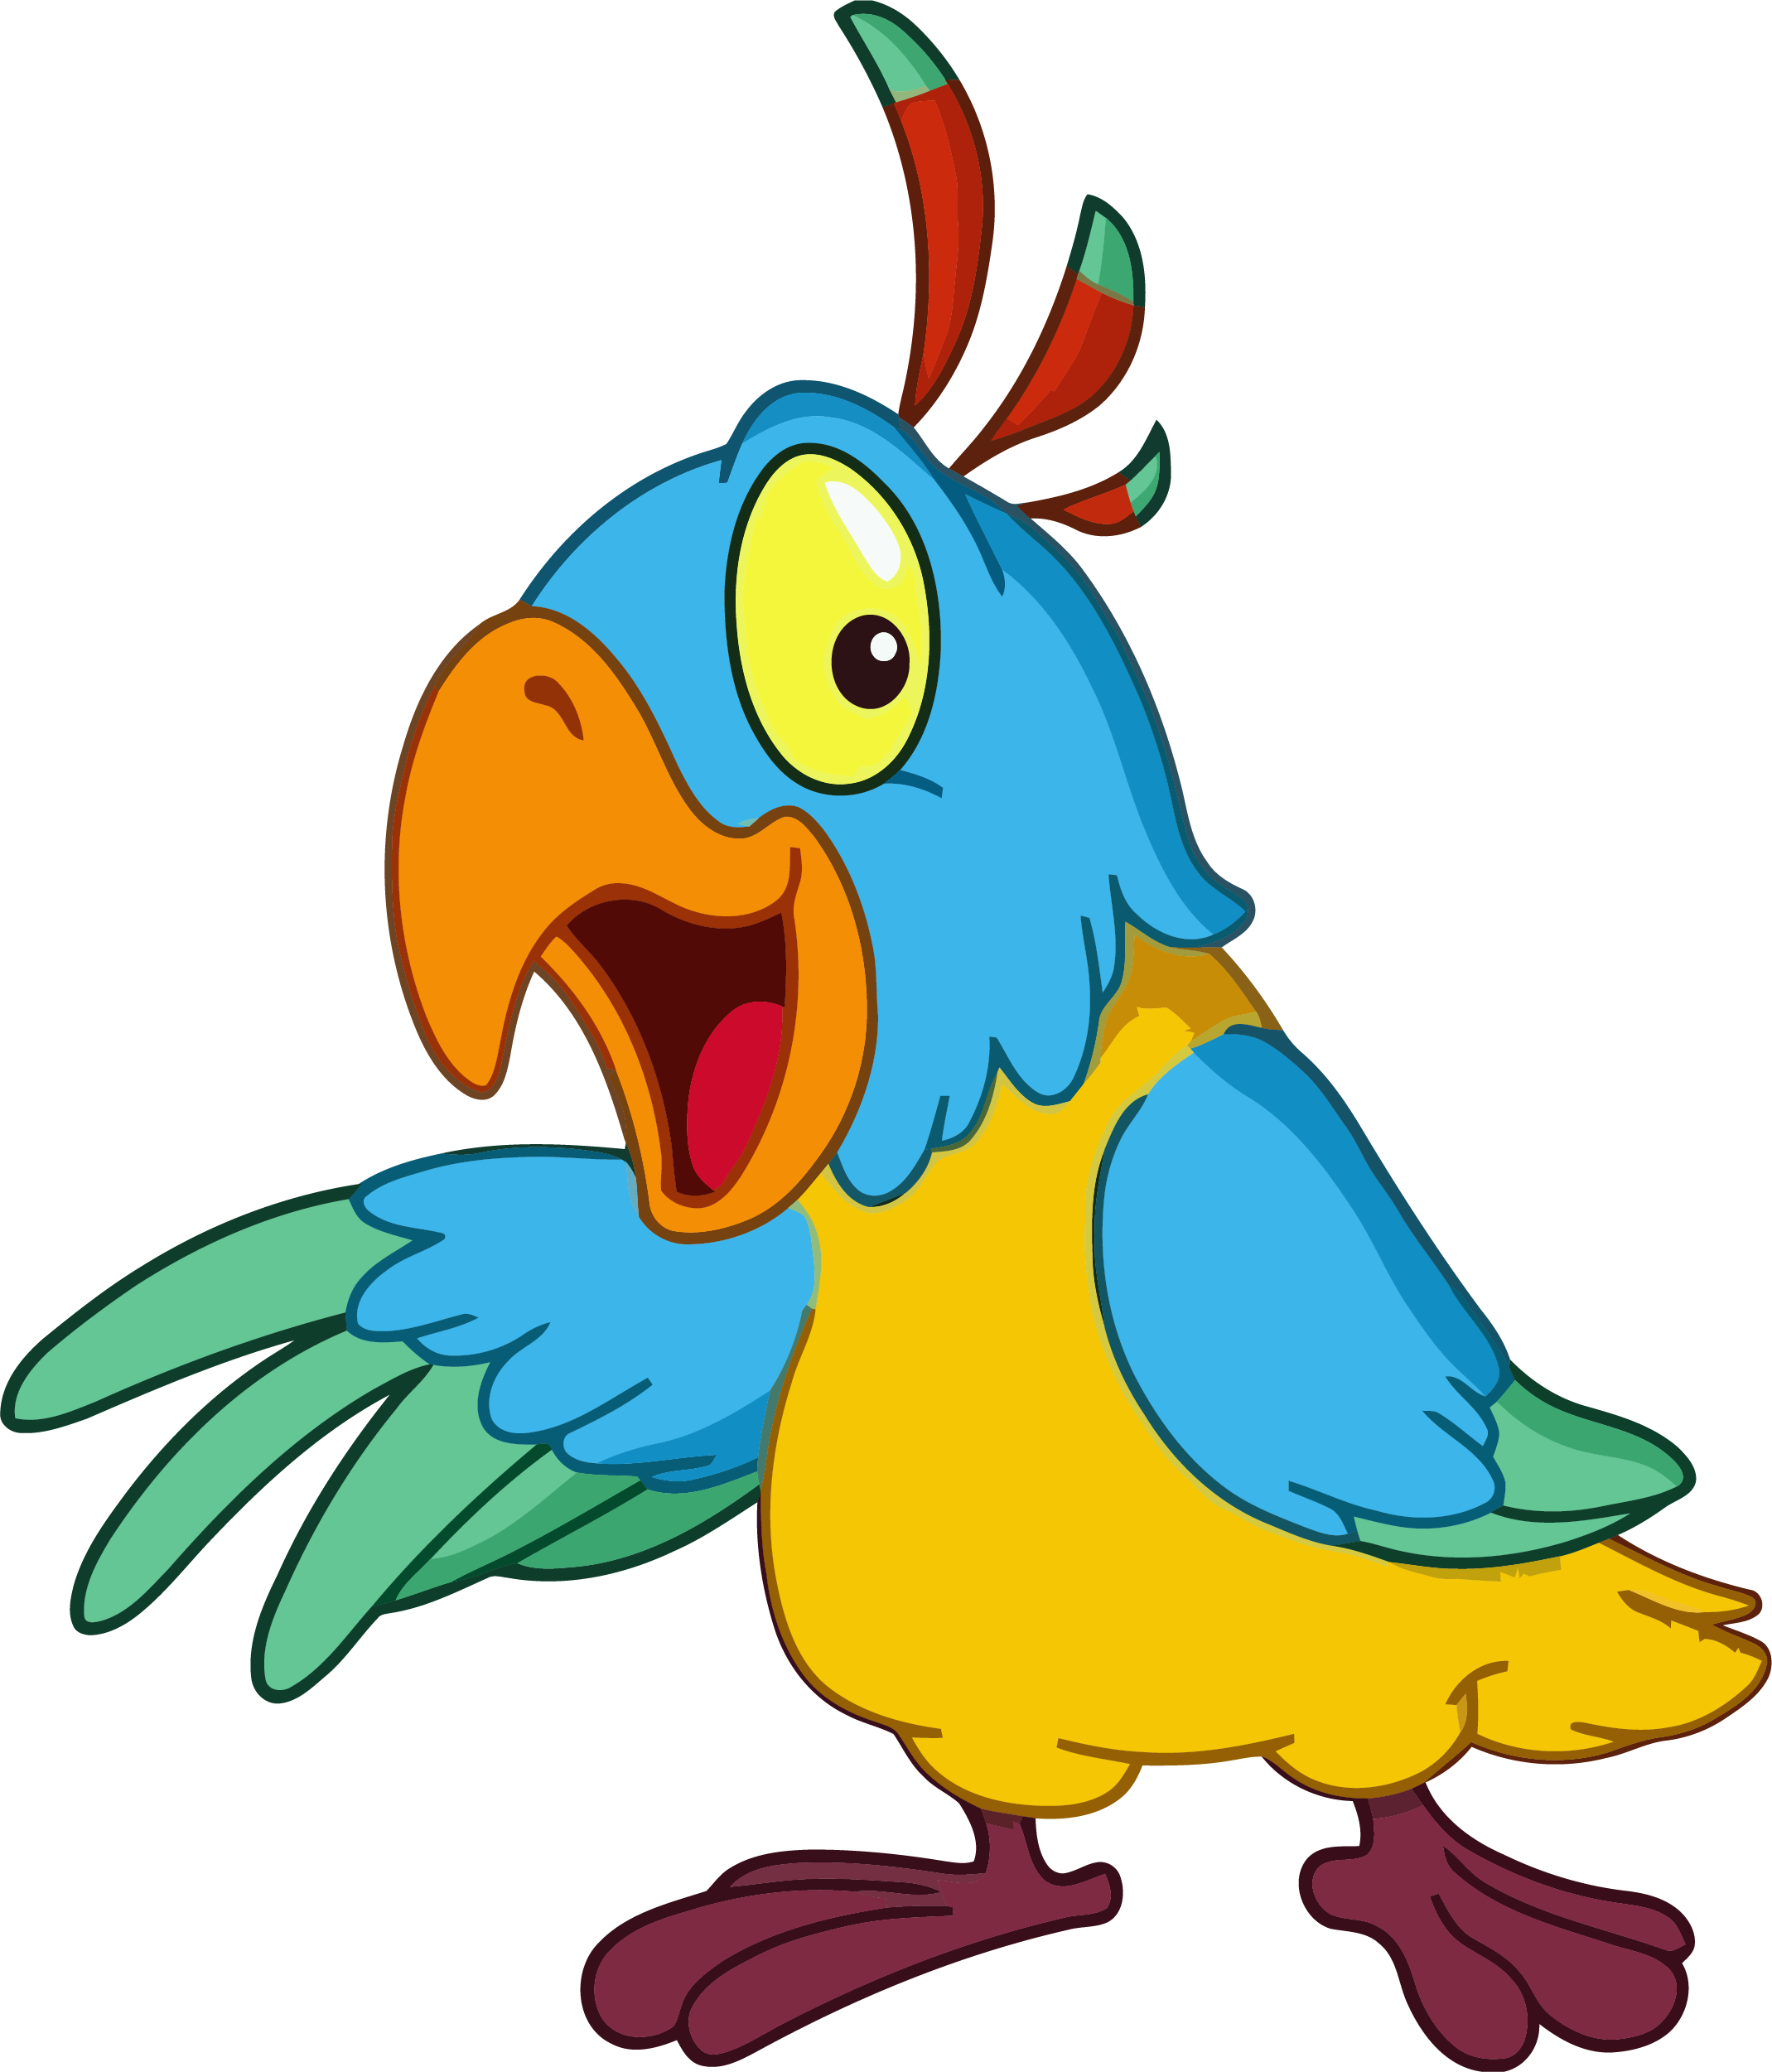 Home clipart parrot. Bird png clipartly comclipartly